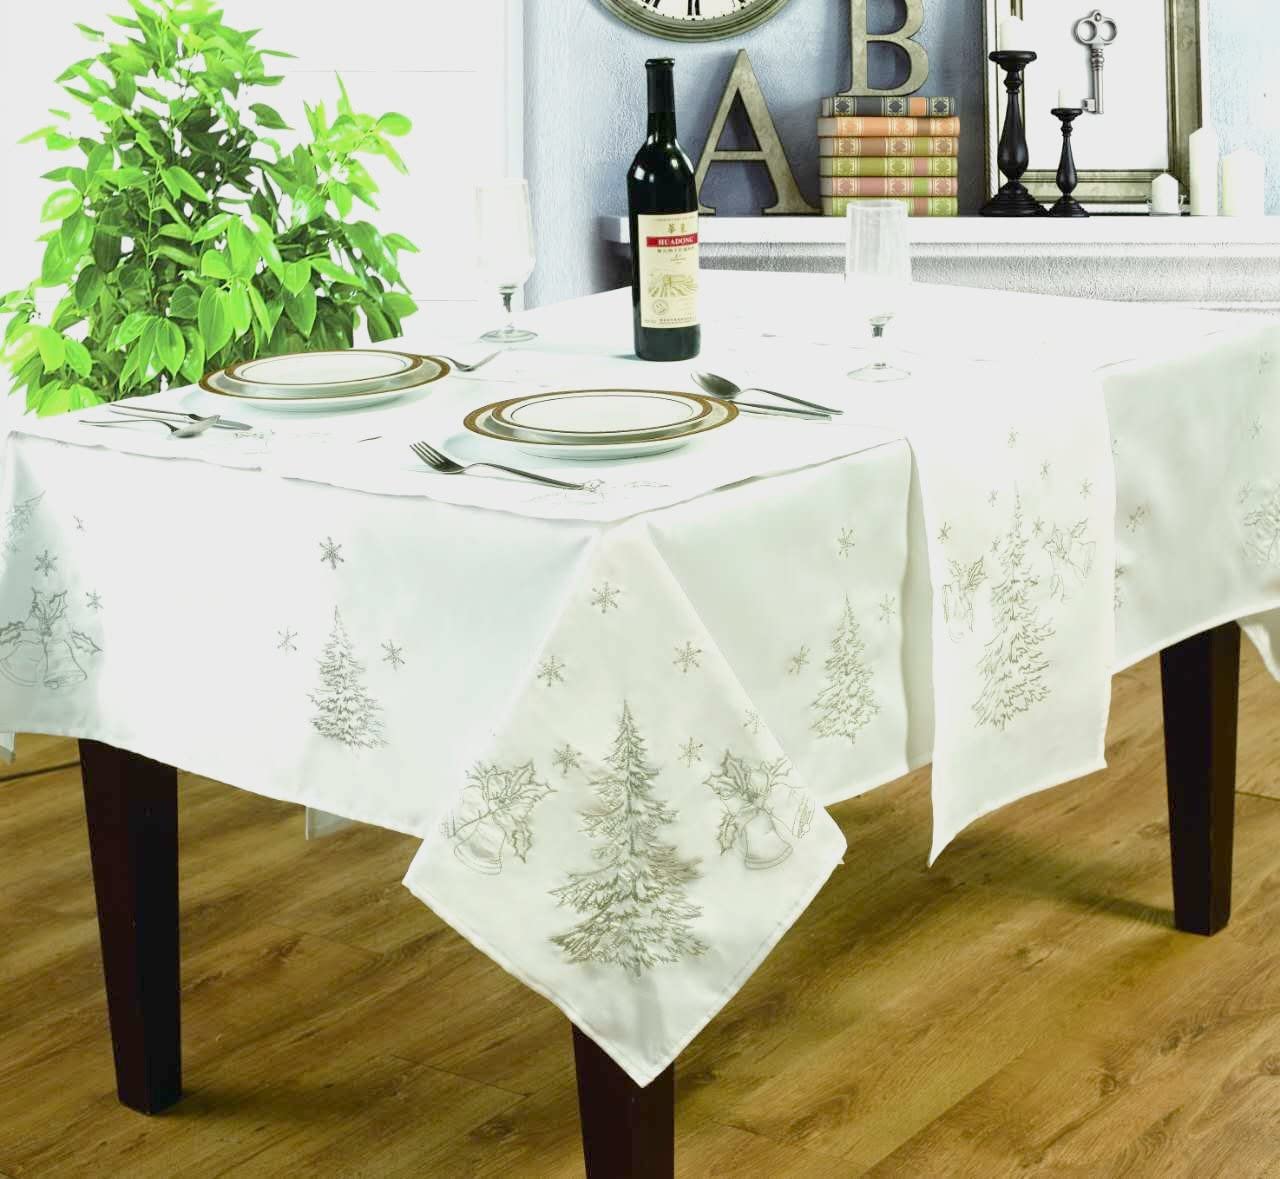 Festive White Silver Festive Dining Table Runner Christmas Party Embroidered Tree Bells Detailing